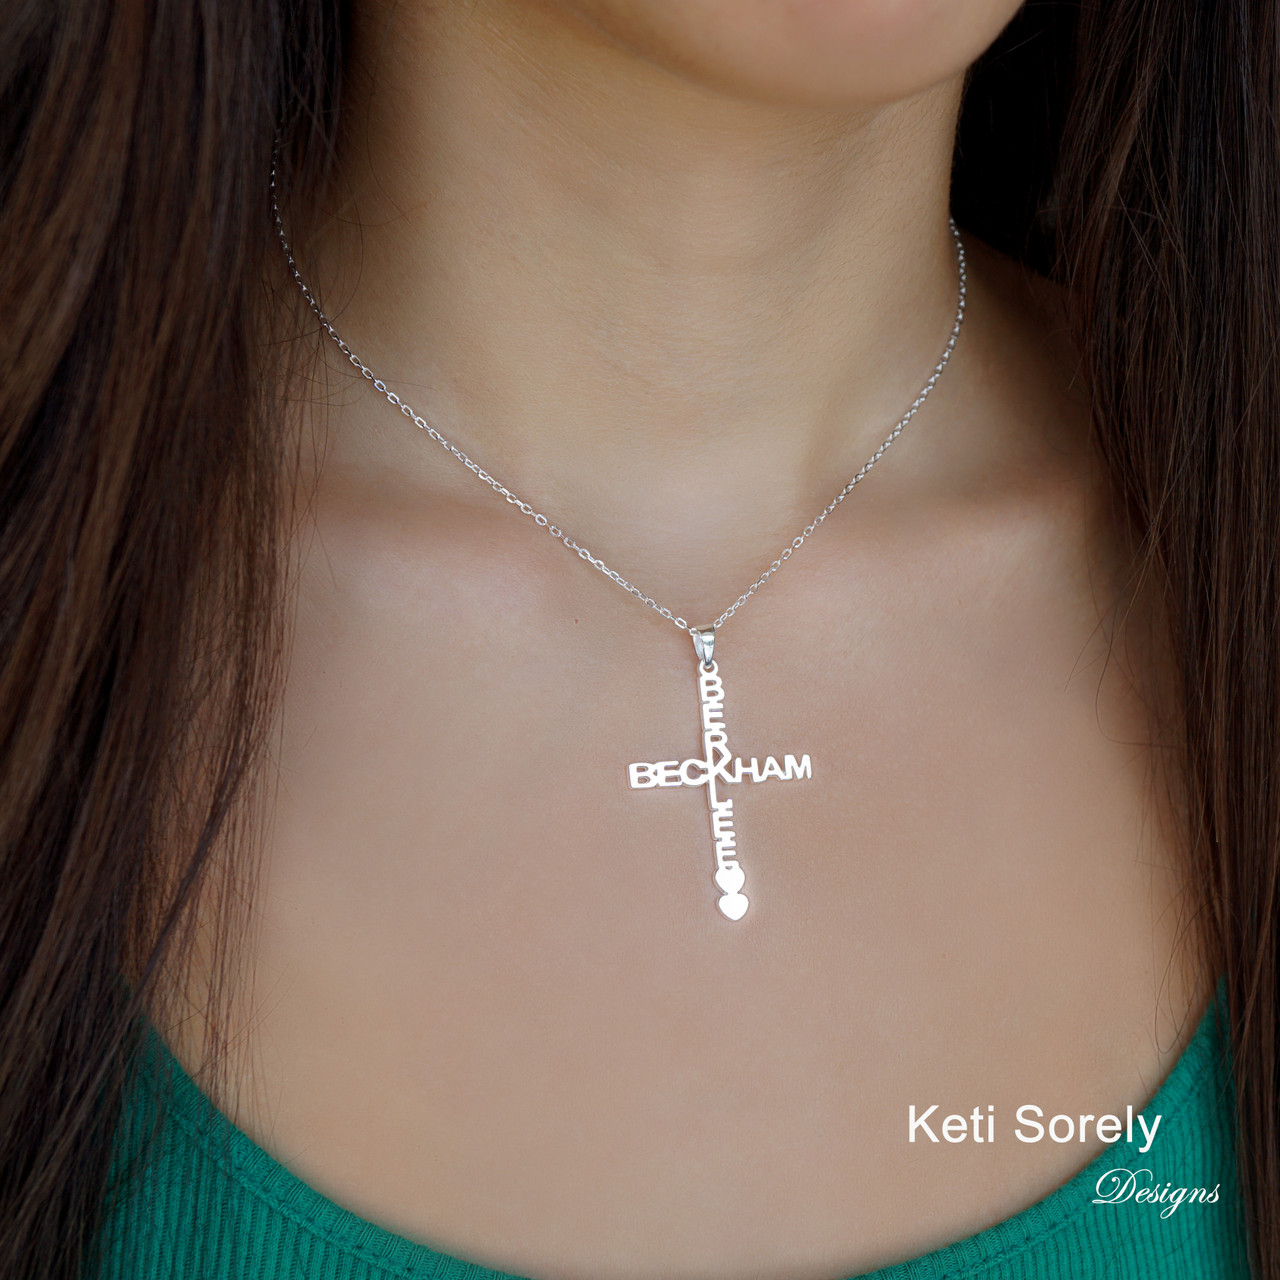 Personalized Cross Necklace with Engraved Stainless steel won't rust -  Unique Art World - Handcraft and Engraving service